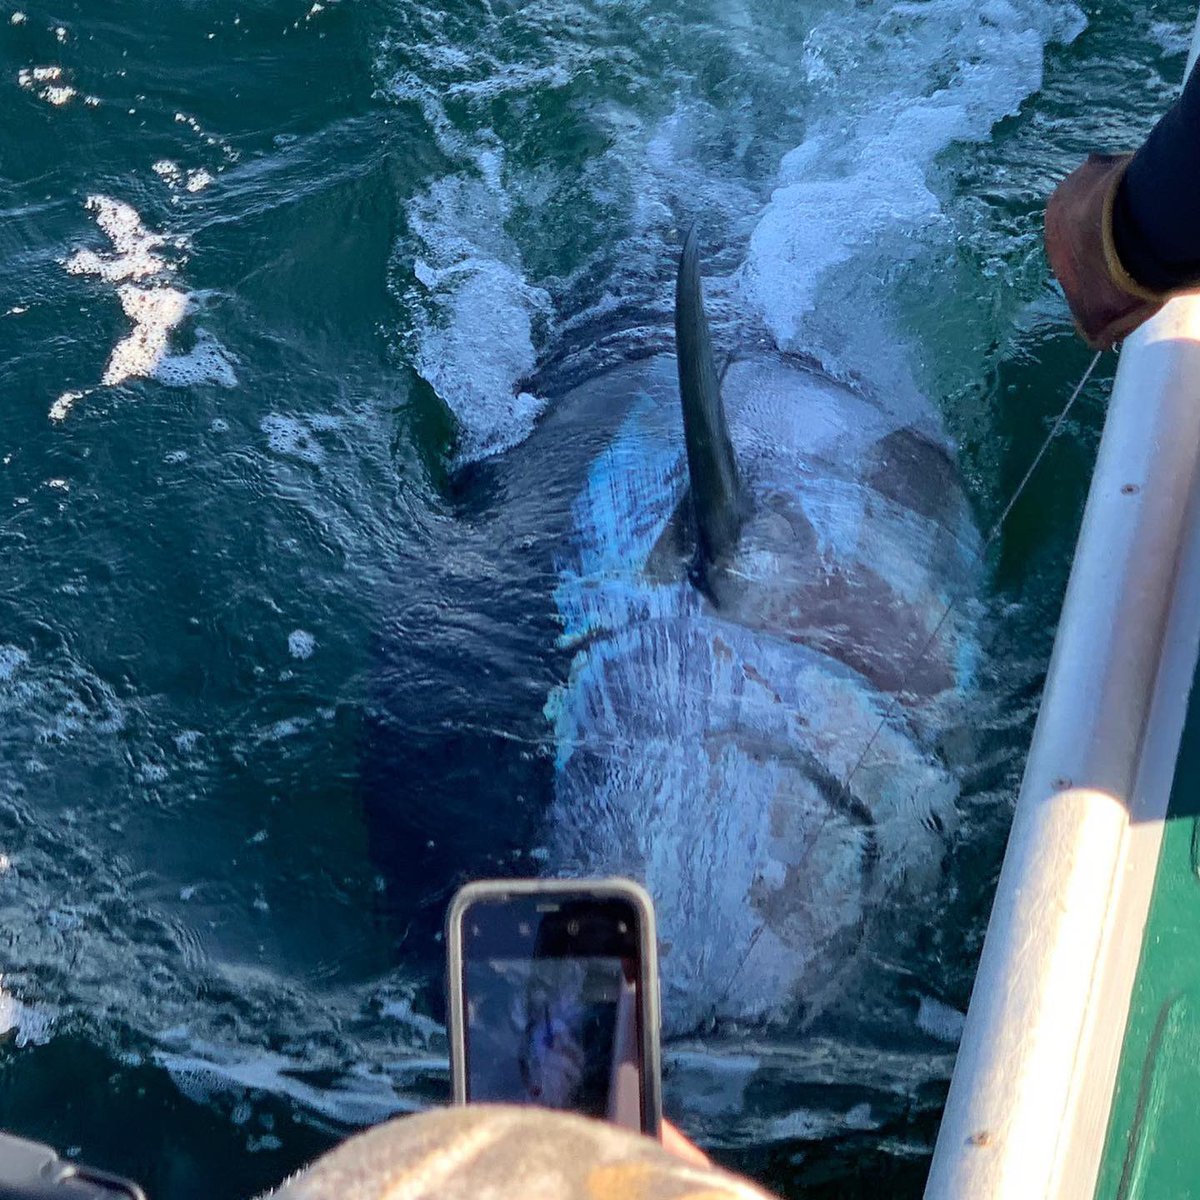 Solid BFT we caught and released in Nova Scotia yesterday, Capt estimated it at 1100 pounds. What an awesome creature.